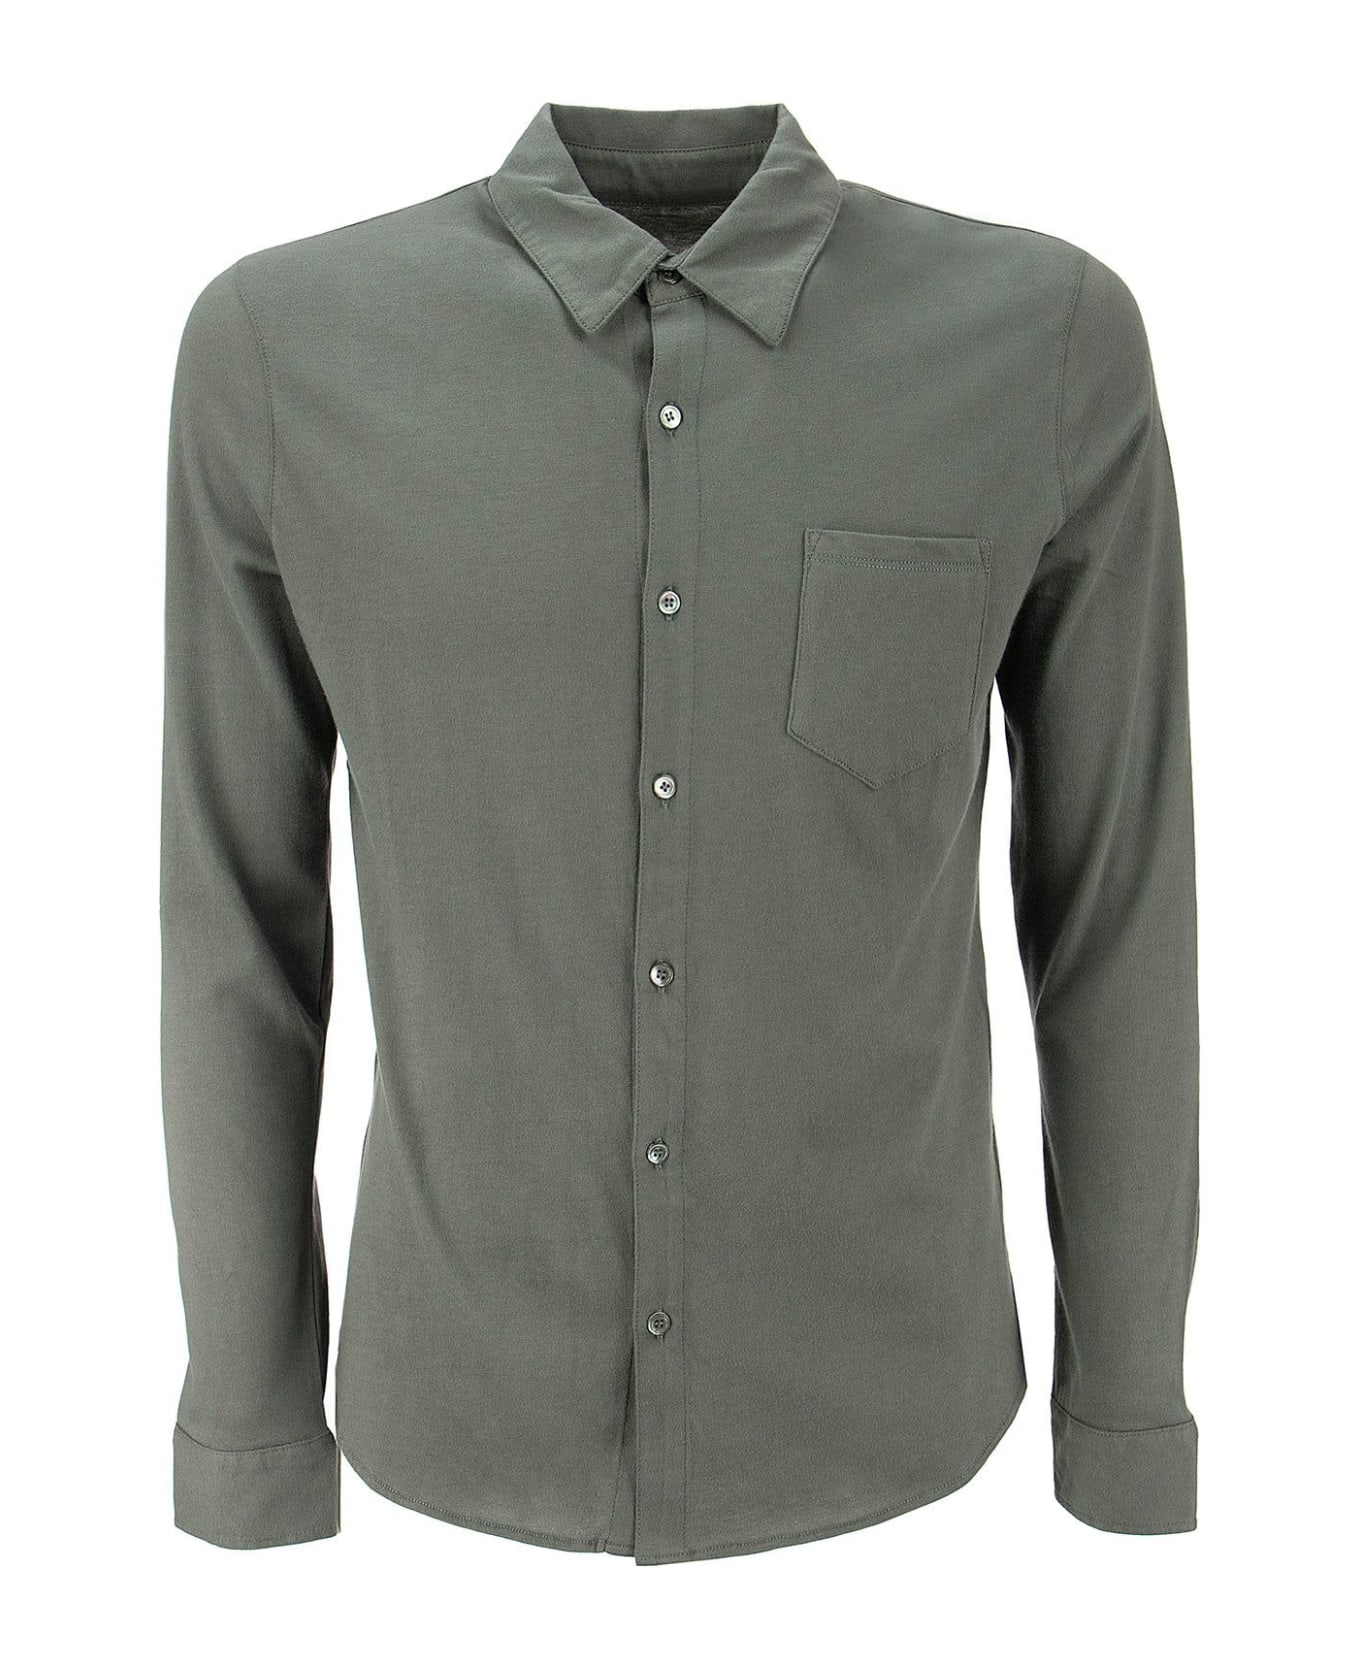 Majestic Filatures Deluxe Cotton Long Sleeve Shirt - Graphite シャツ